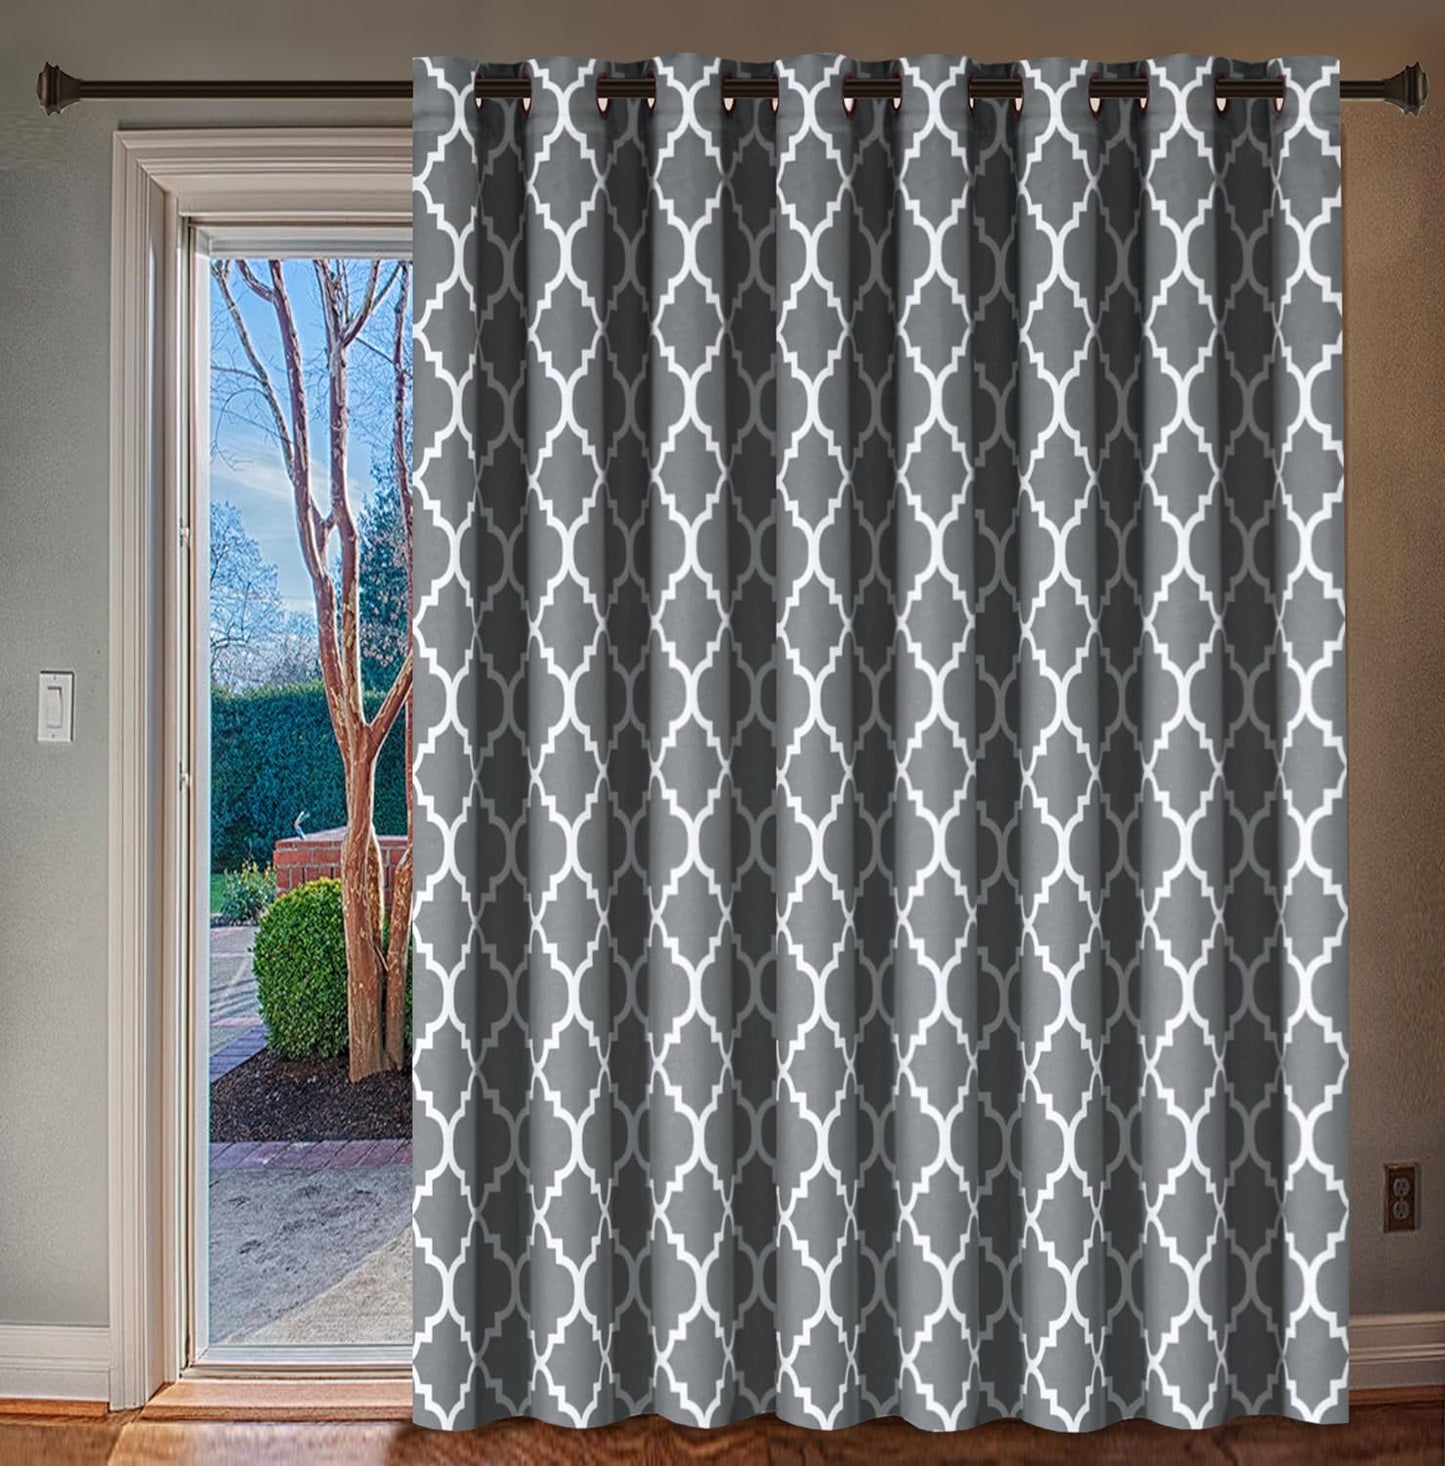 H.VERSAILTEX Extra Wide Blackout Curtain 100X84 Inches Thermal Insulated Curtain for Sliding Glass Door -Grommet Top Patio Door Curtain - Moroccan Tile Quatrefoil Pattern, Dove and White  H.VERSAILTEX Grey  White 100"W X 96"L 